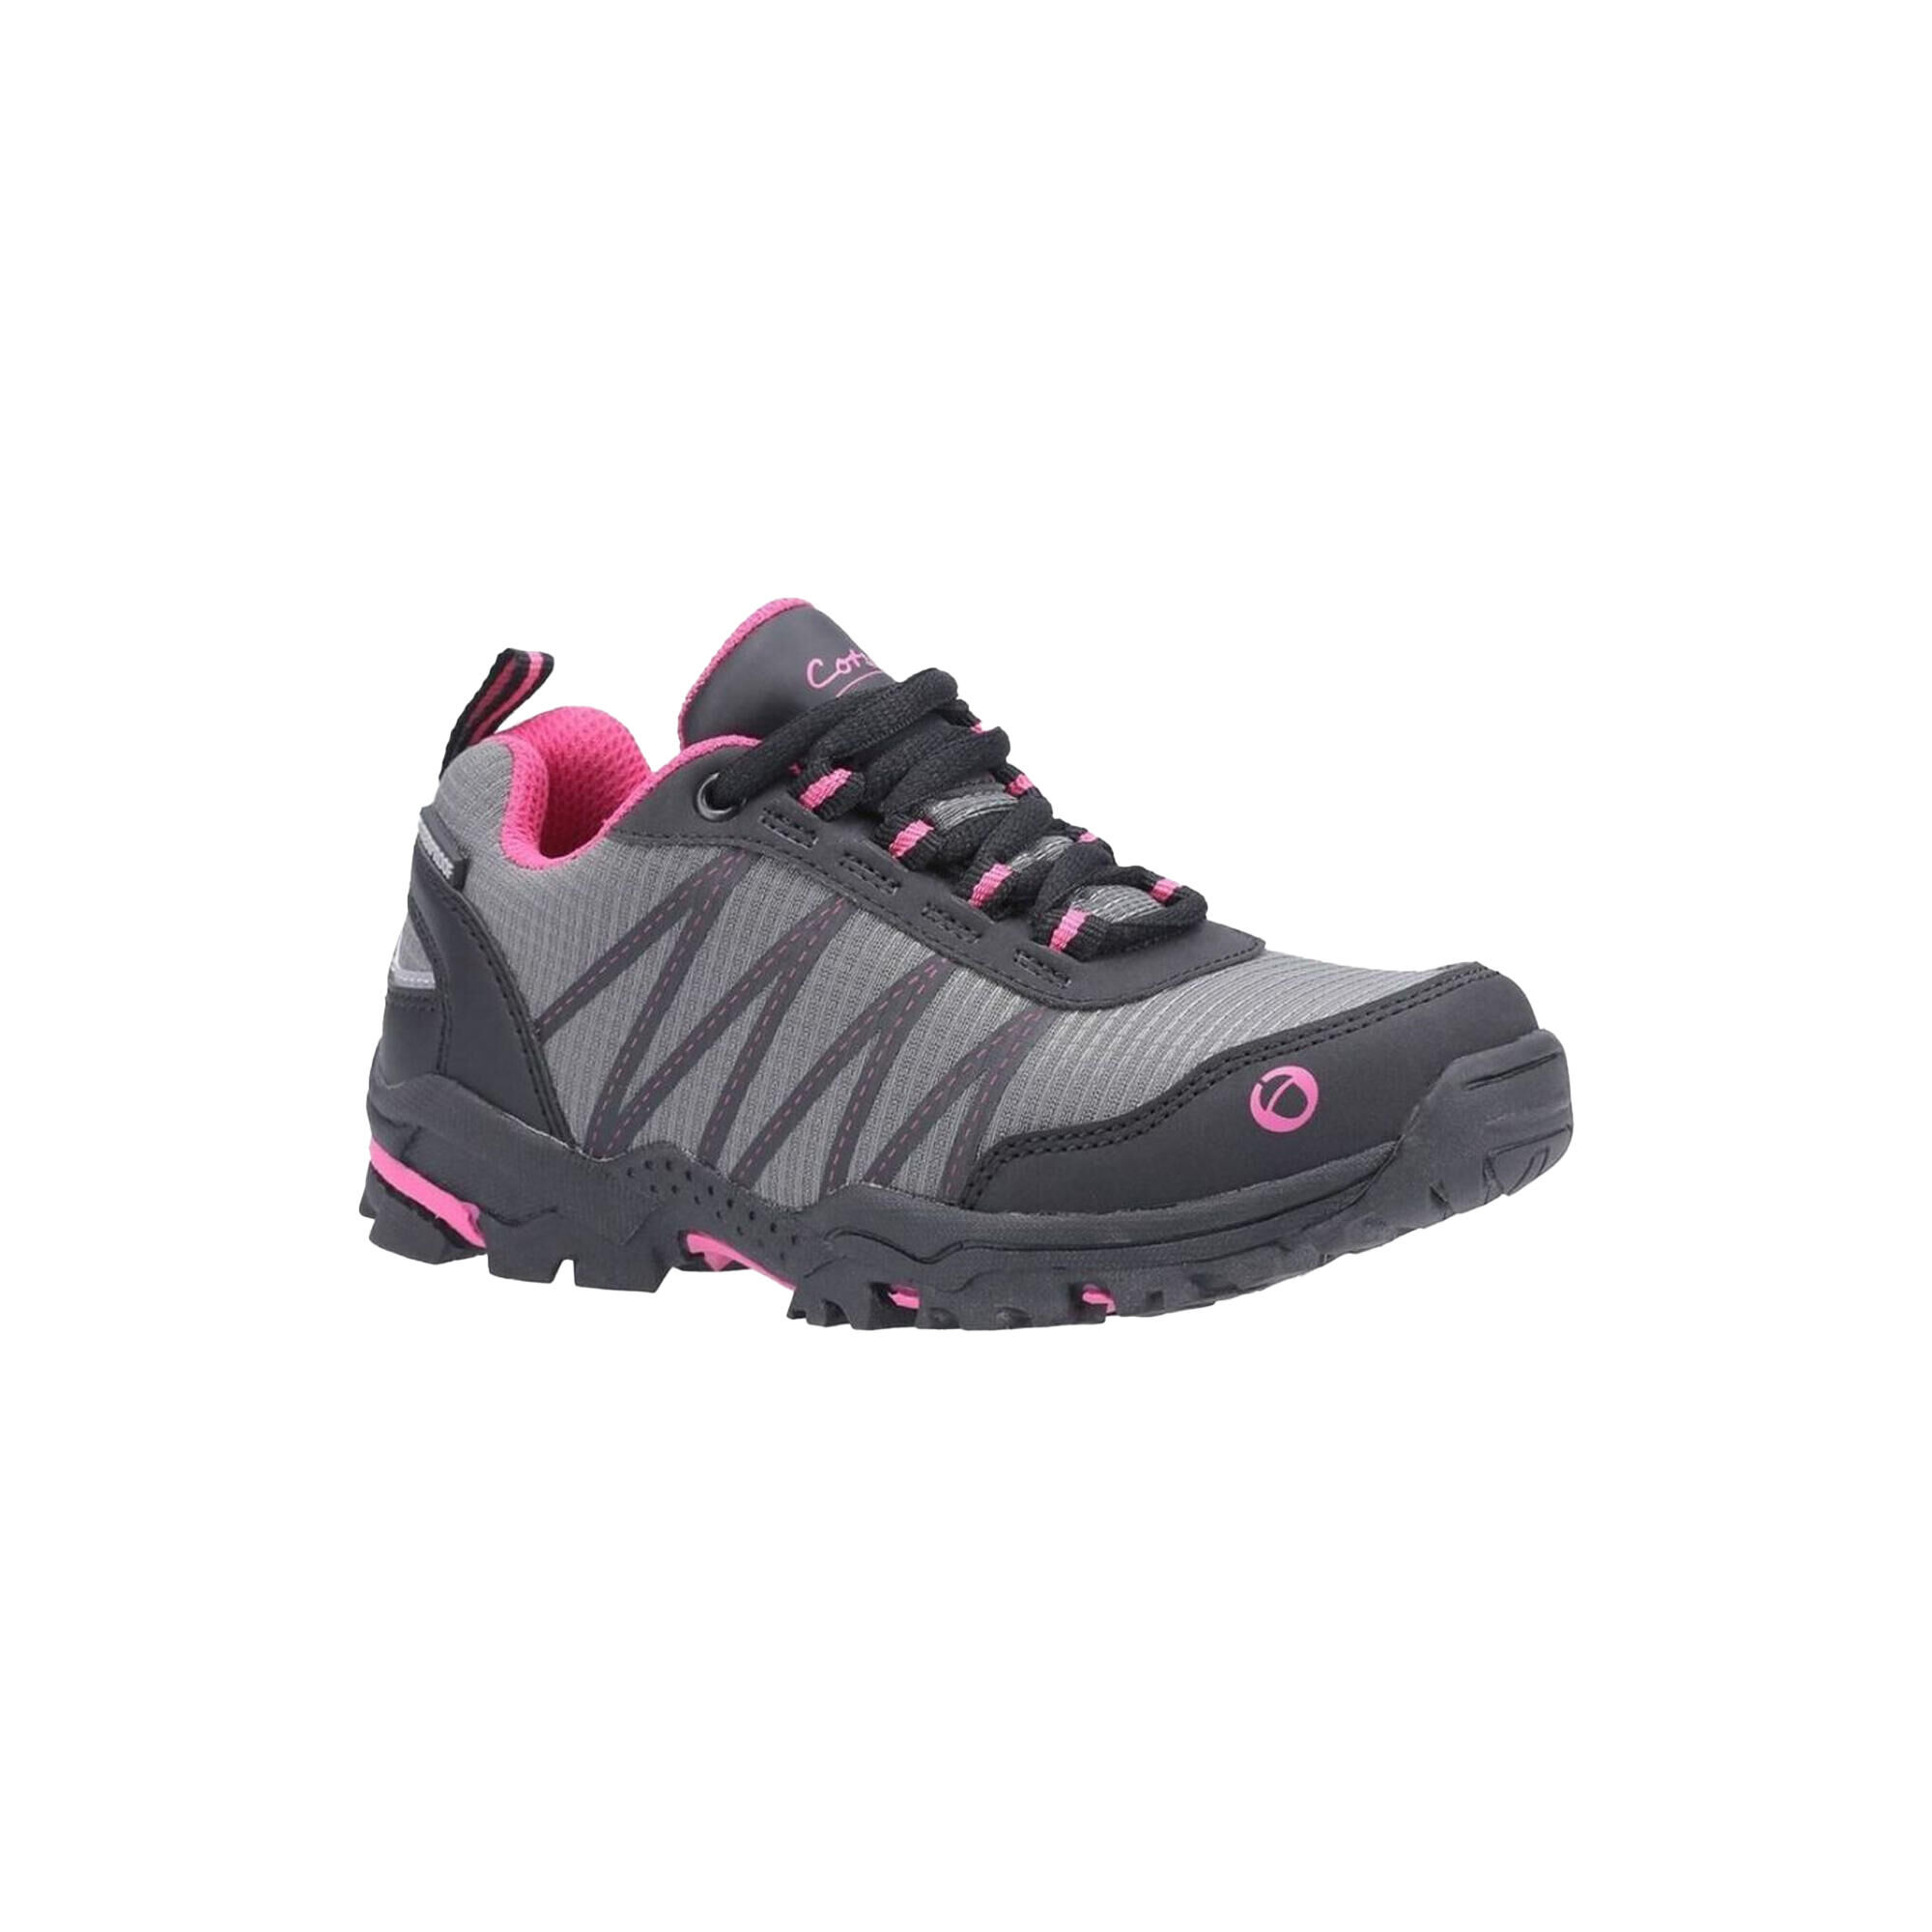 COTSWOLD Childrens/Kids Little Dean Lace Up Hiking Waterproof Trainer (Pink/Grey)